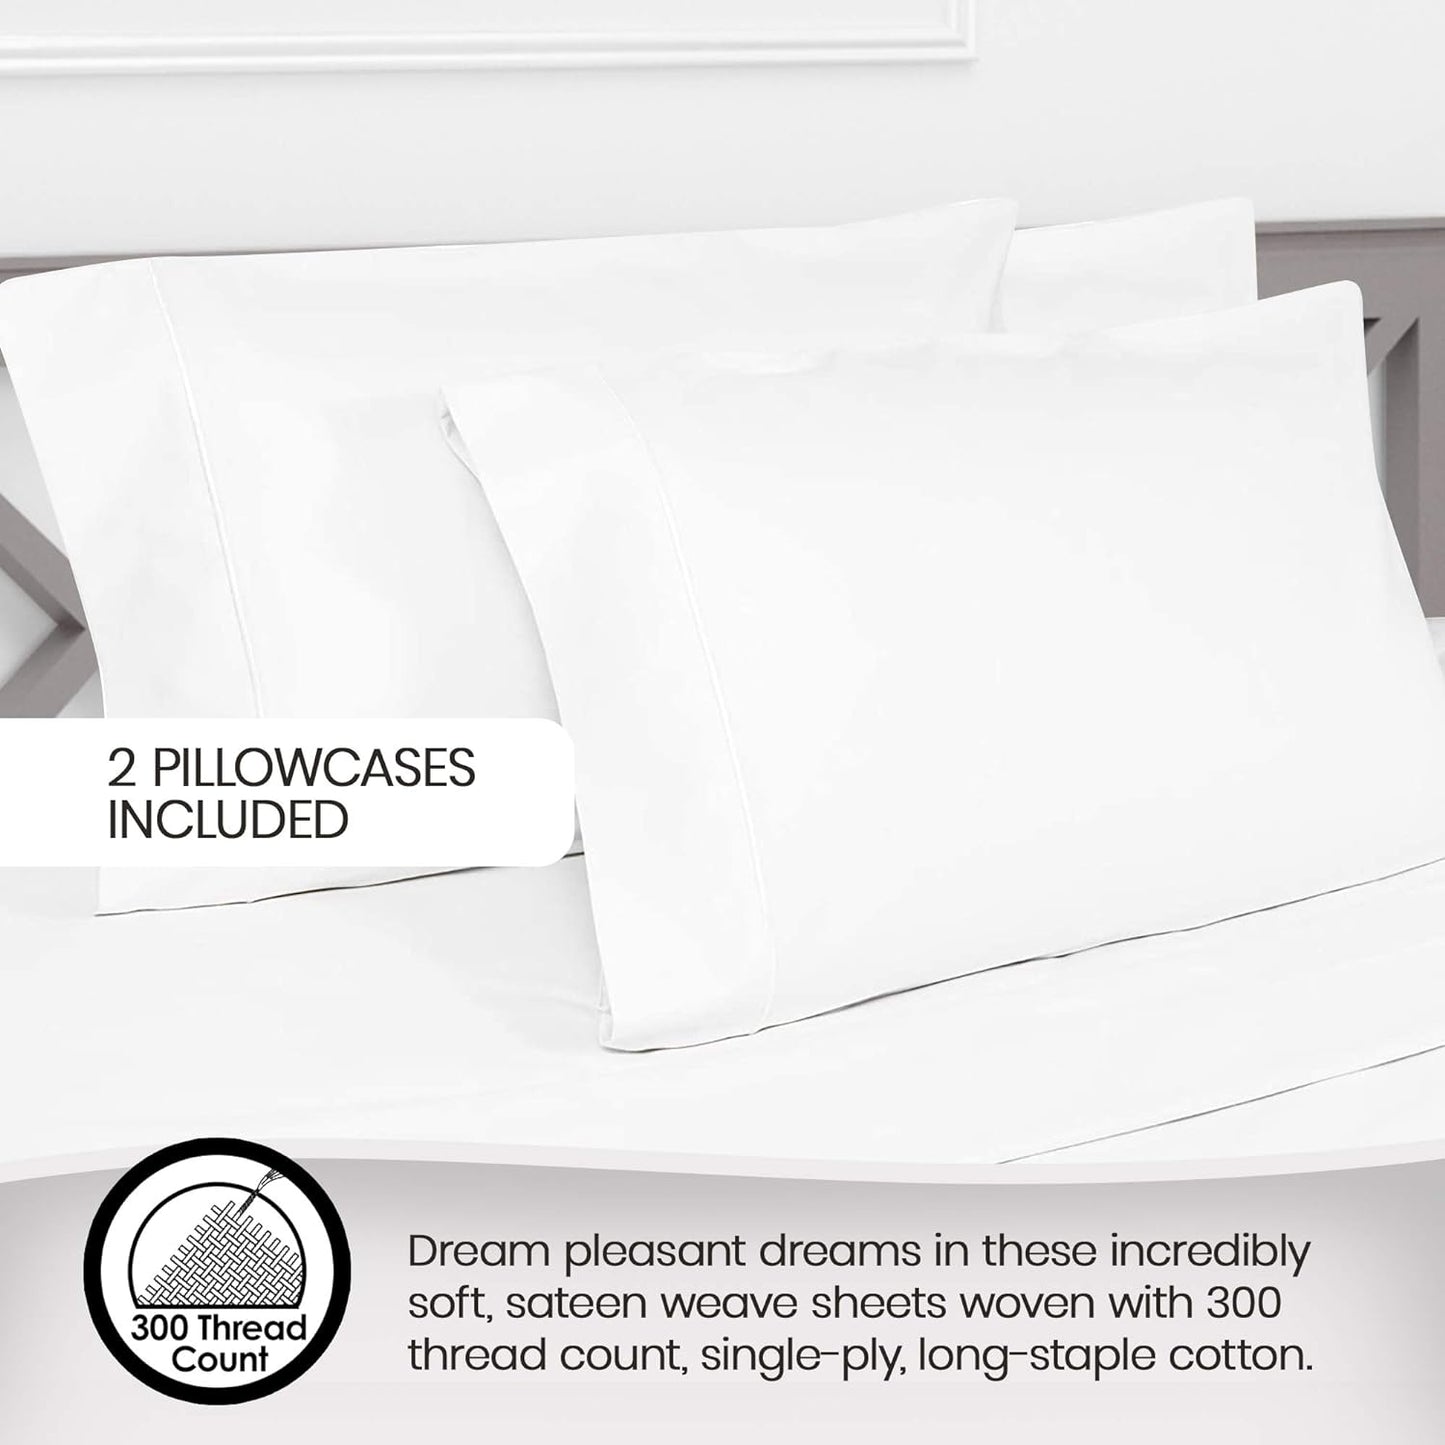 , 100% Organic Cotton Sheets - 300 Thread Count Bed Sheets Set - Premium Quality Sheets - Deep Pocket Sheet Set - GOTS Certified, White (Cal King Size)